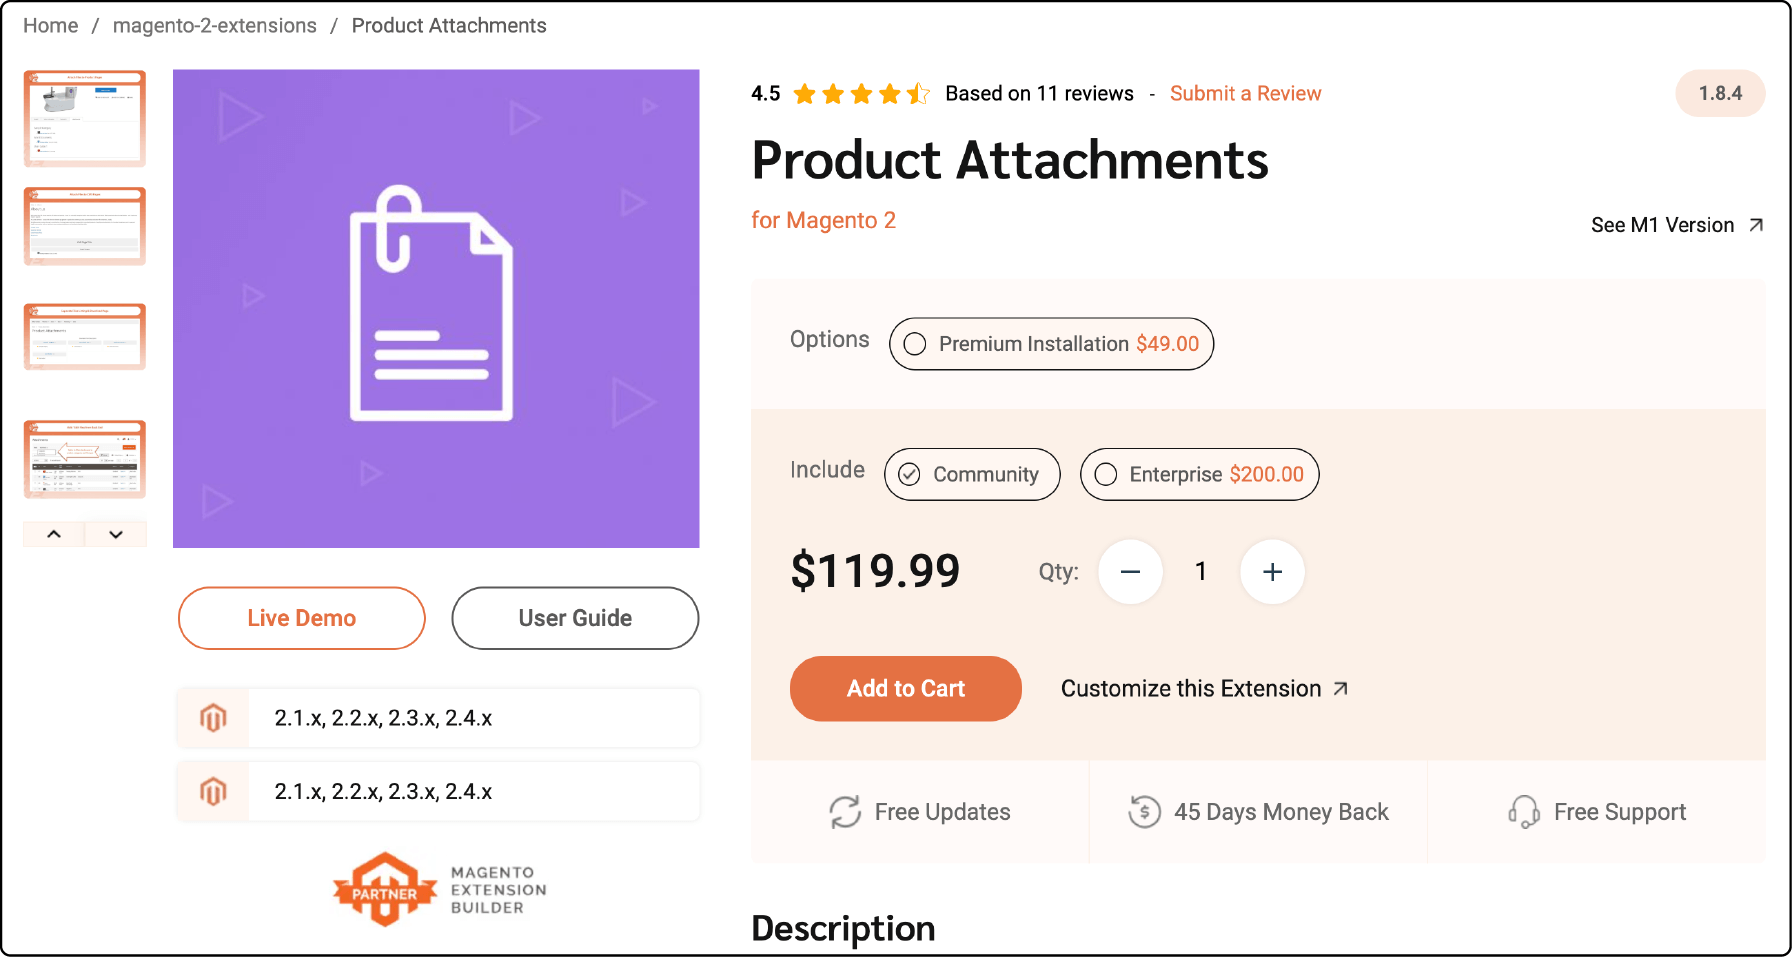 FMEExtensions' Magento 2 Product Attachments Screenshot